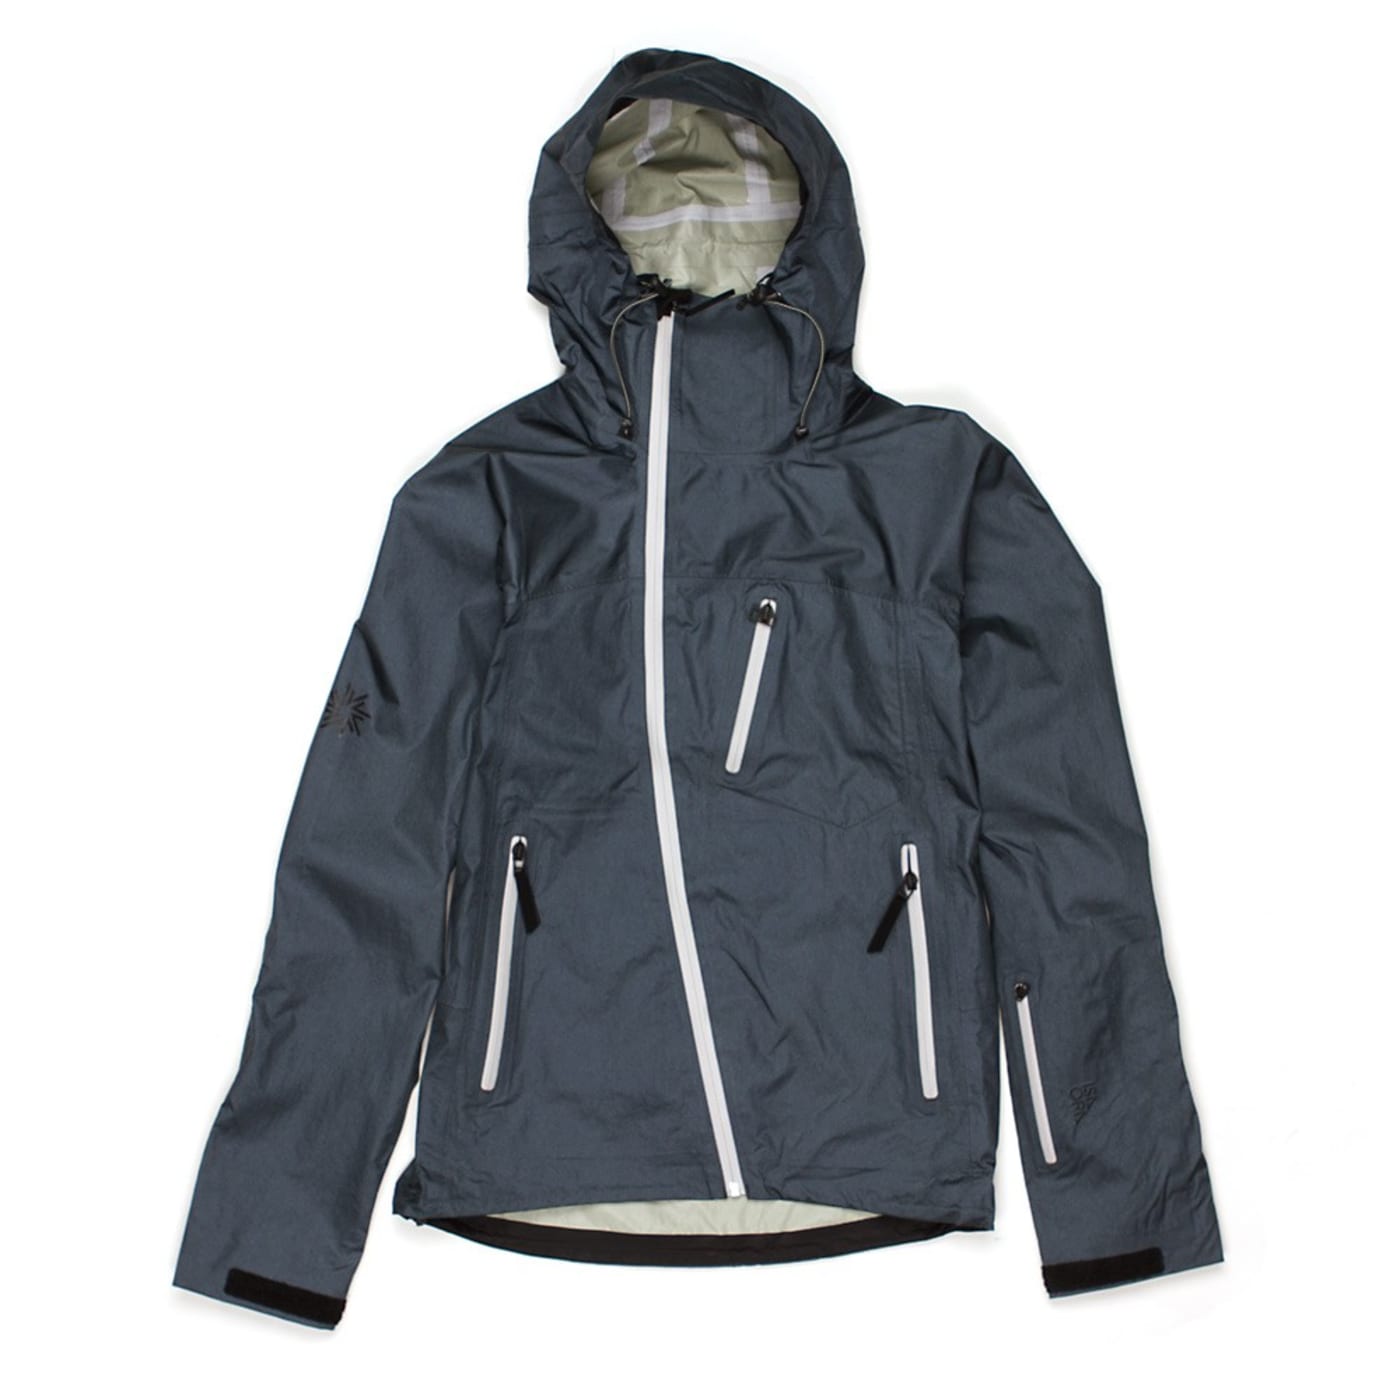 Outerwear Cosign: Isaora 2.5 Layer Shell | Complex